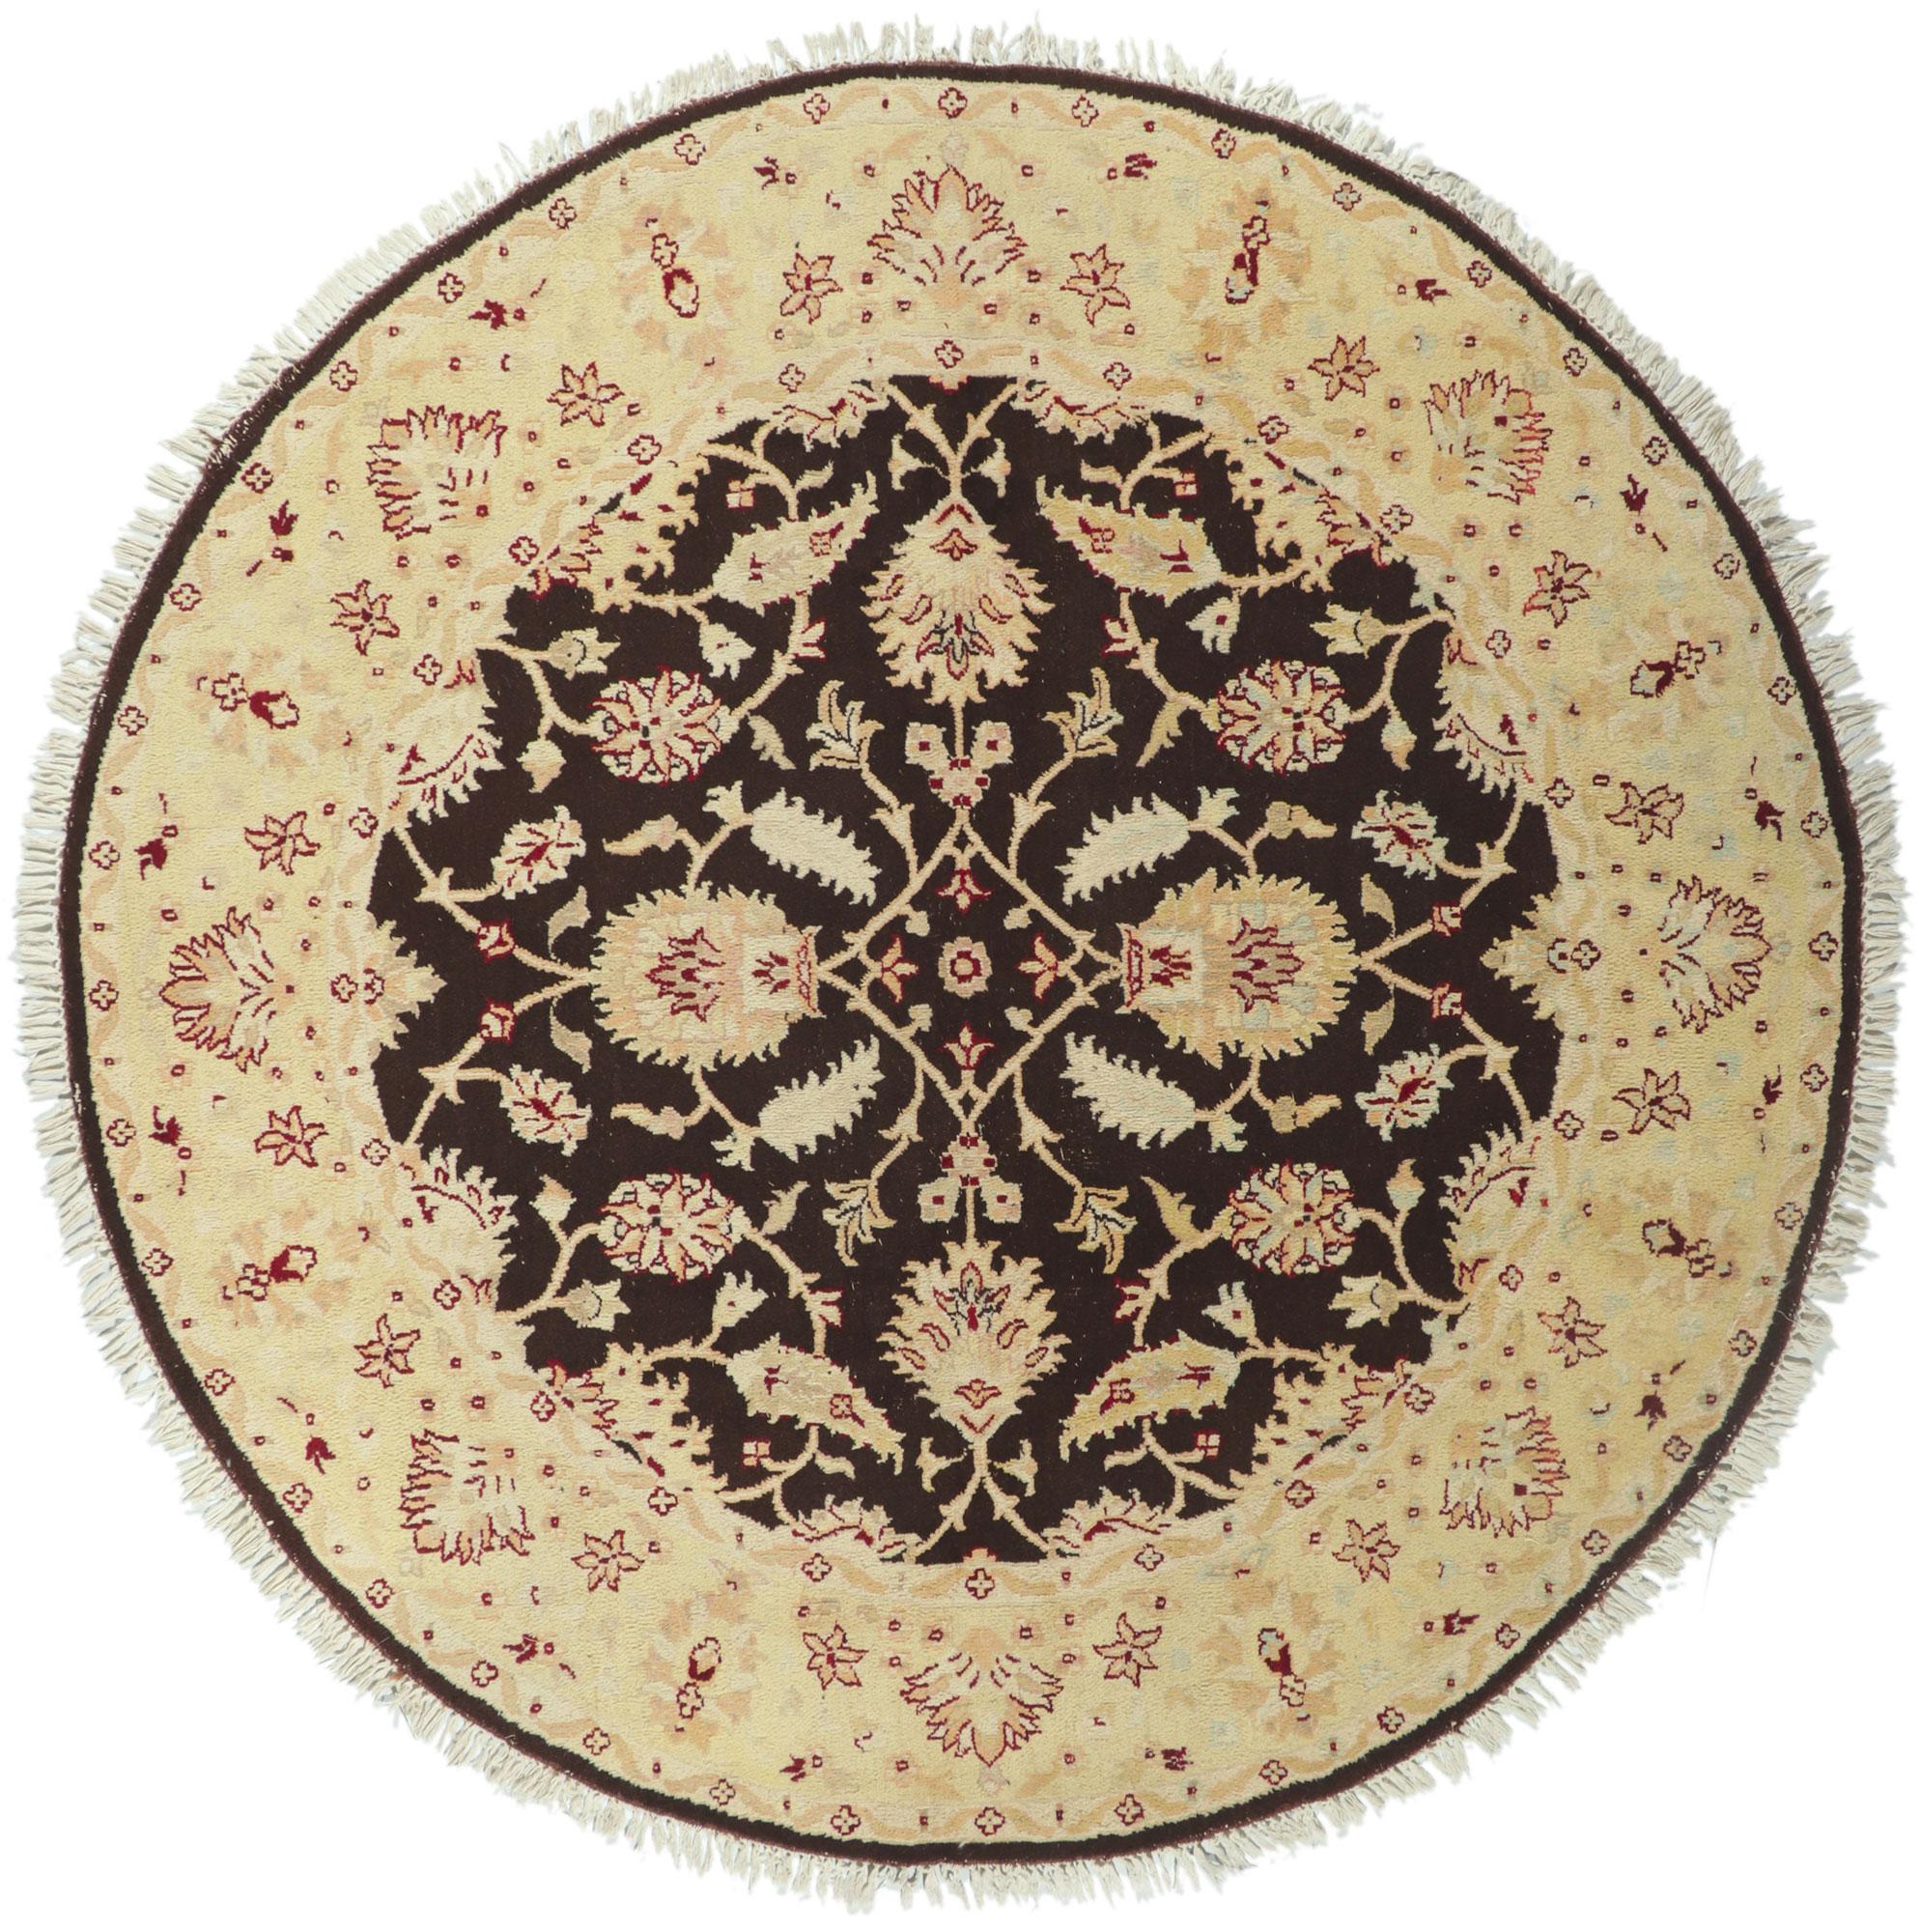 Tapis indien rond vintage avec style persan traditionnel